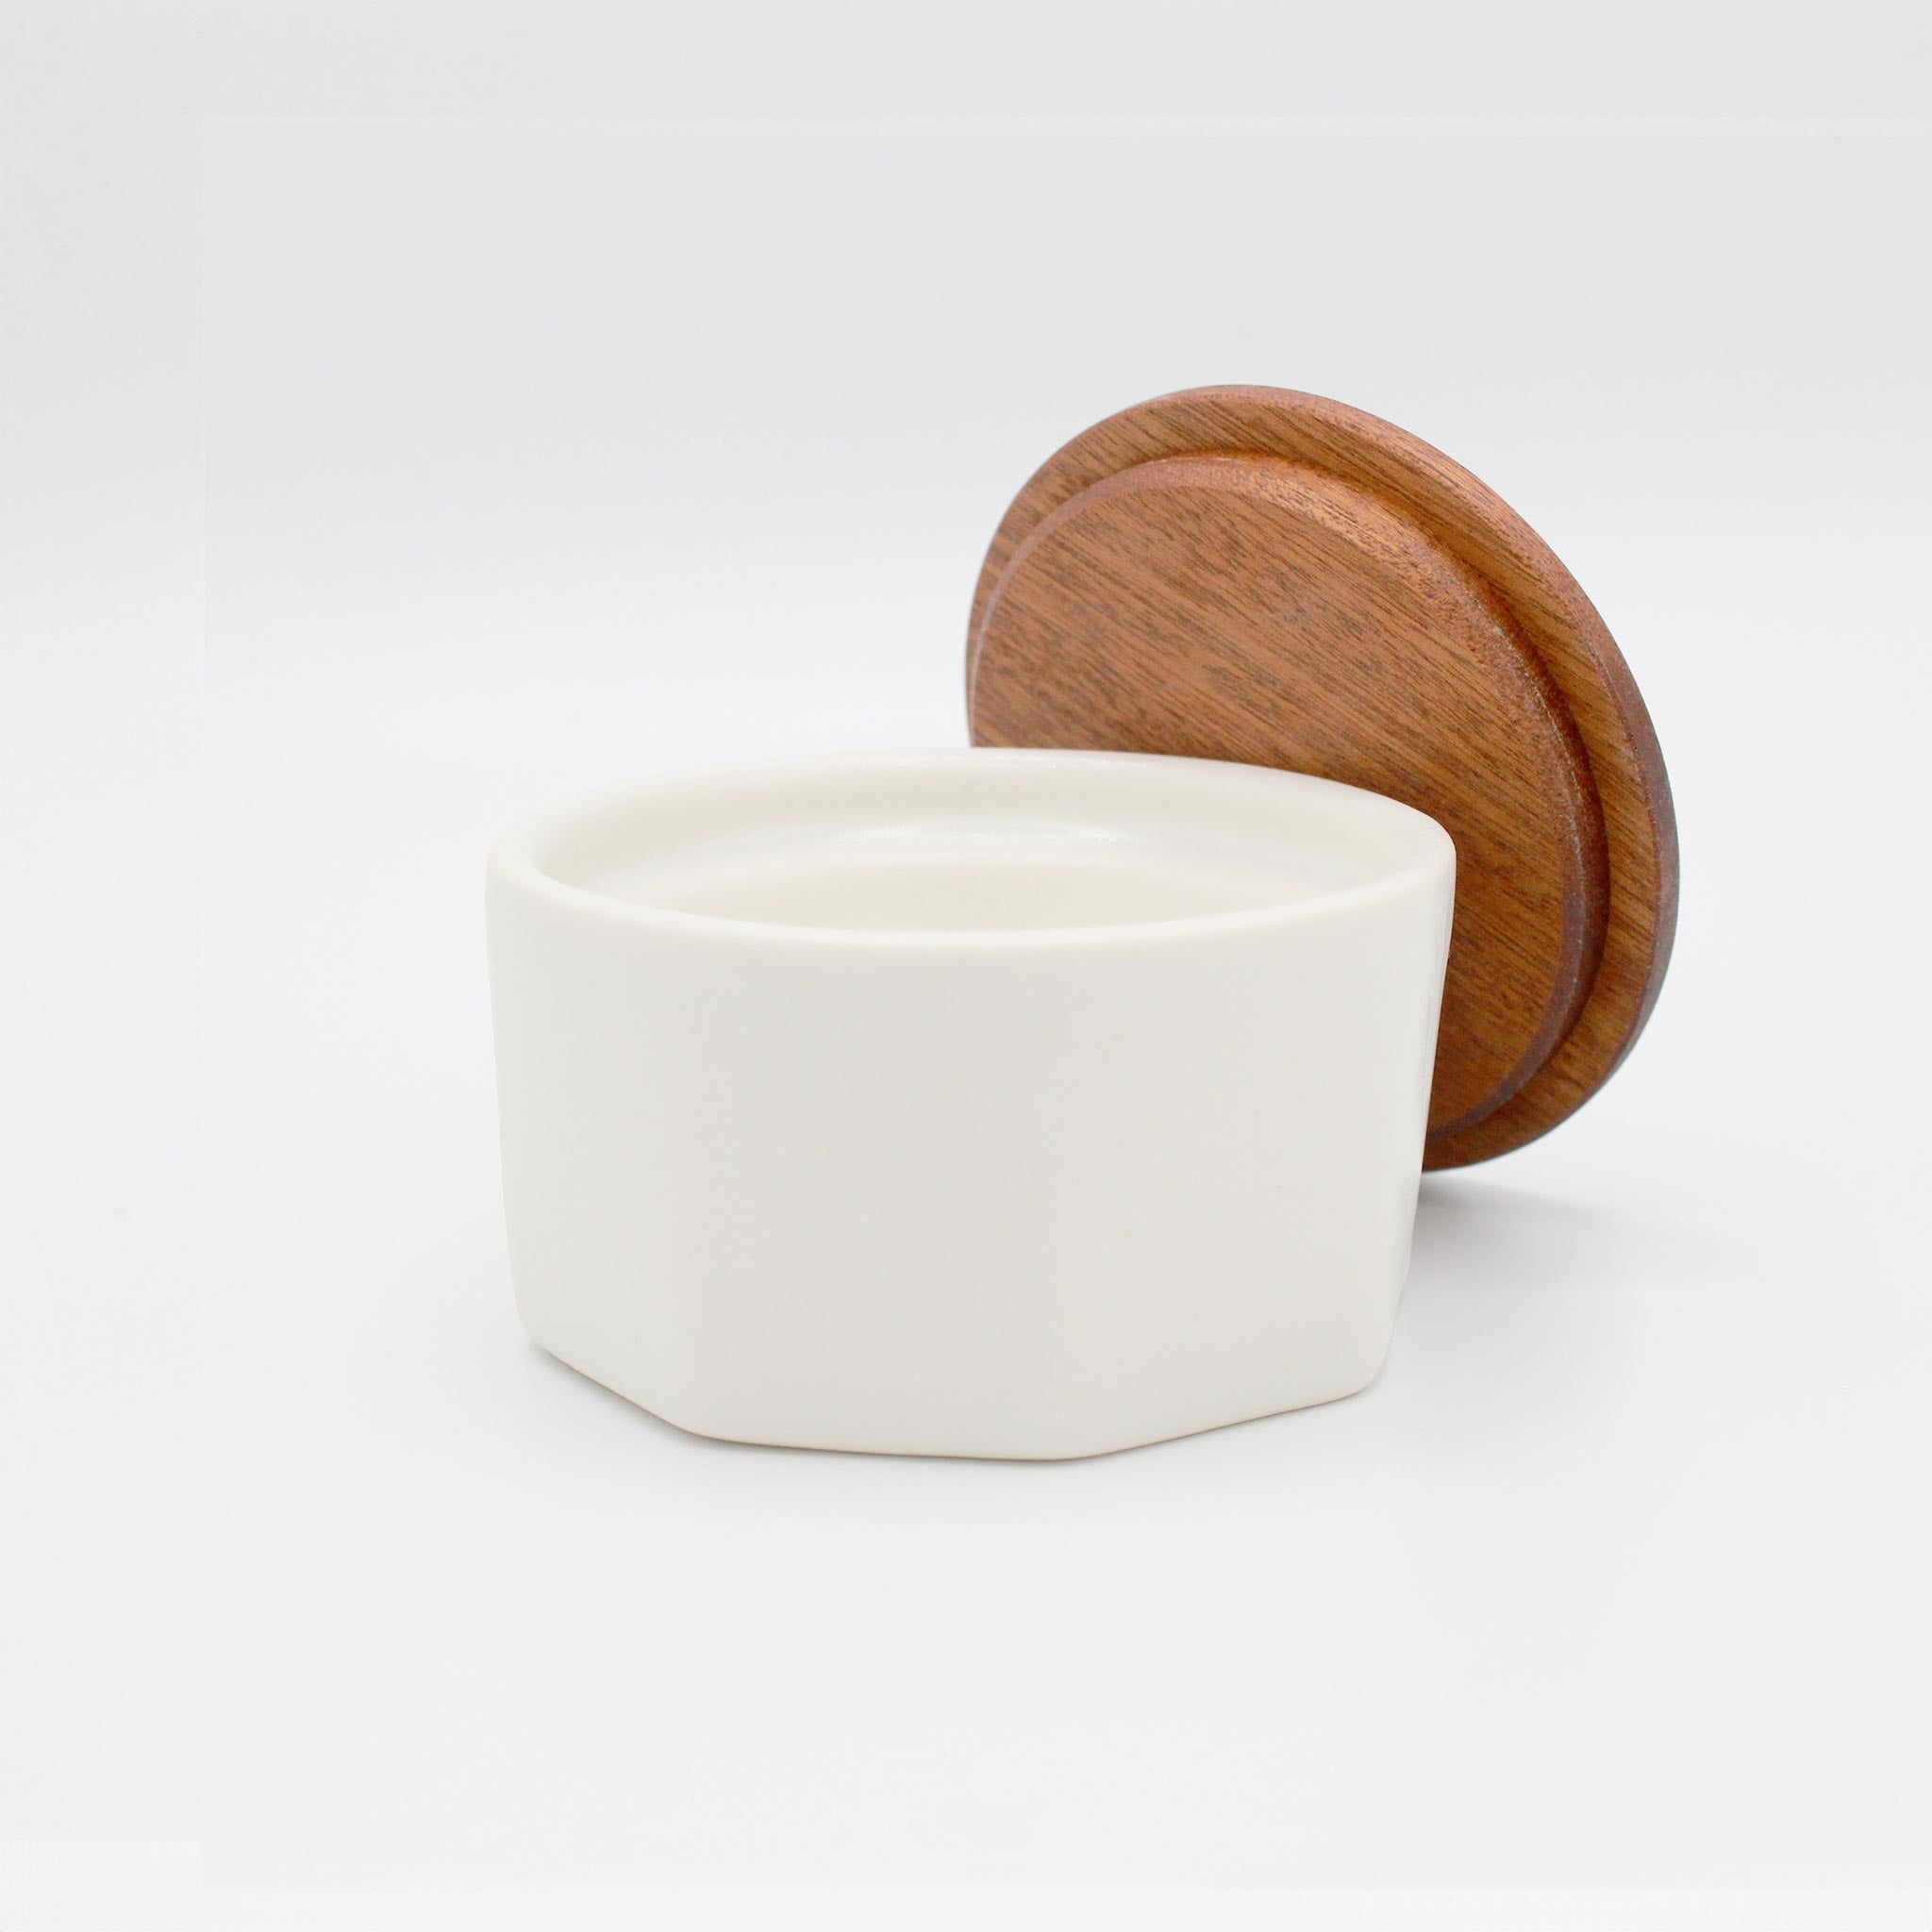 Wood Lid for Salt Cellar The Bright Angle